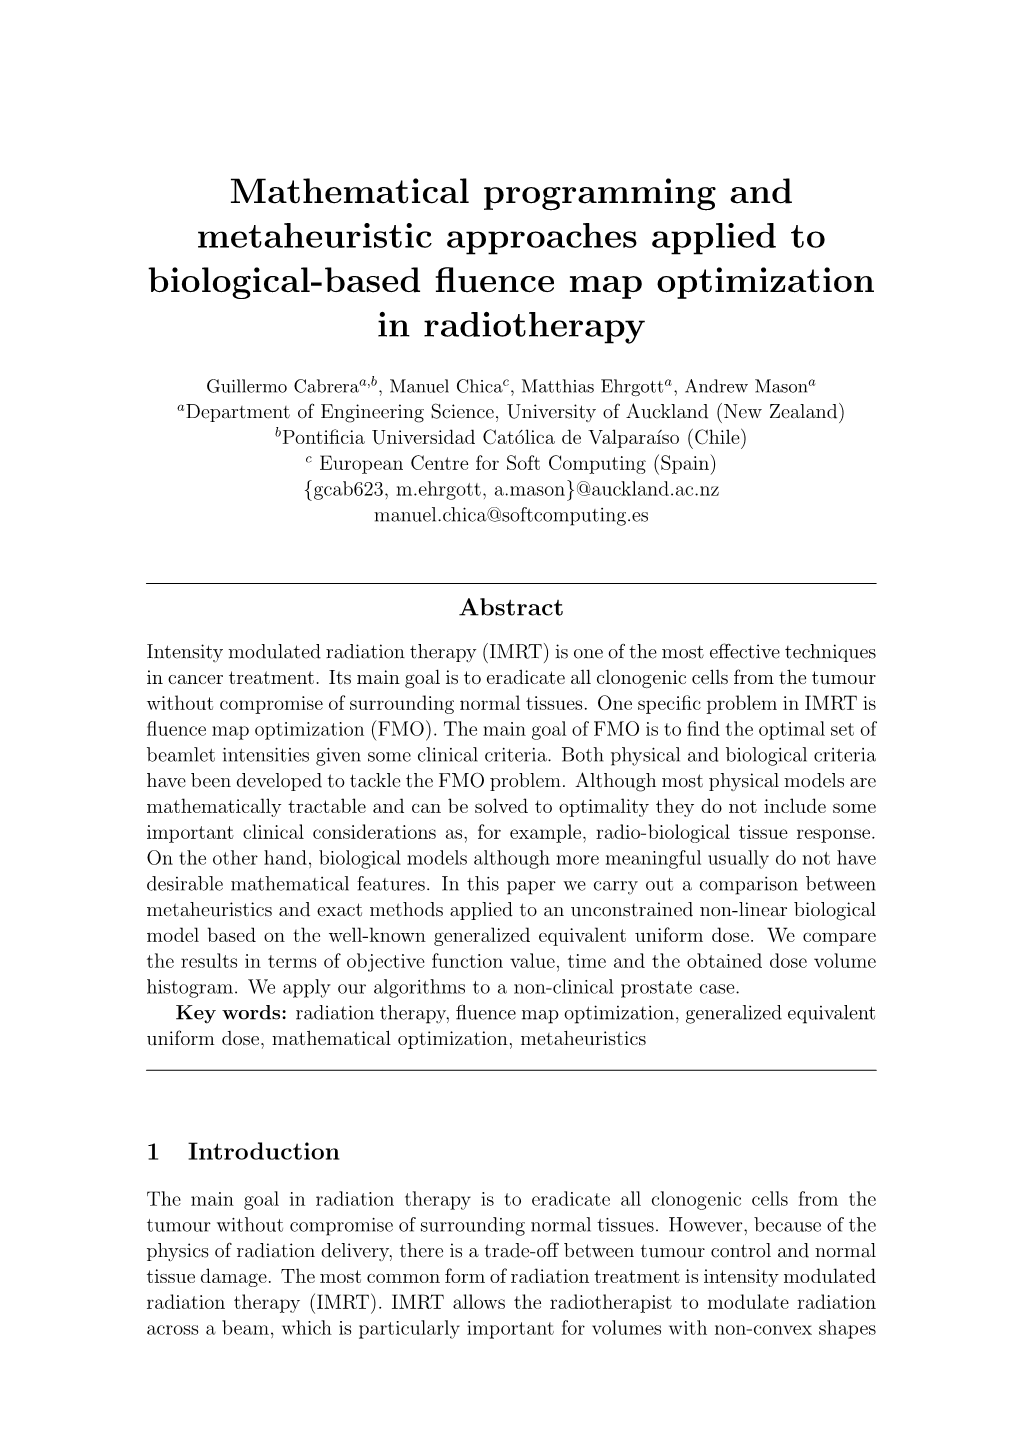 Mathematical Programming and Metaheuristic Approaches Applied to Biological-Based Fluence Map Optimization in Radiotherapy